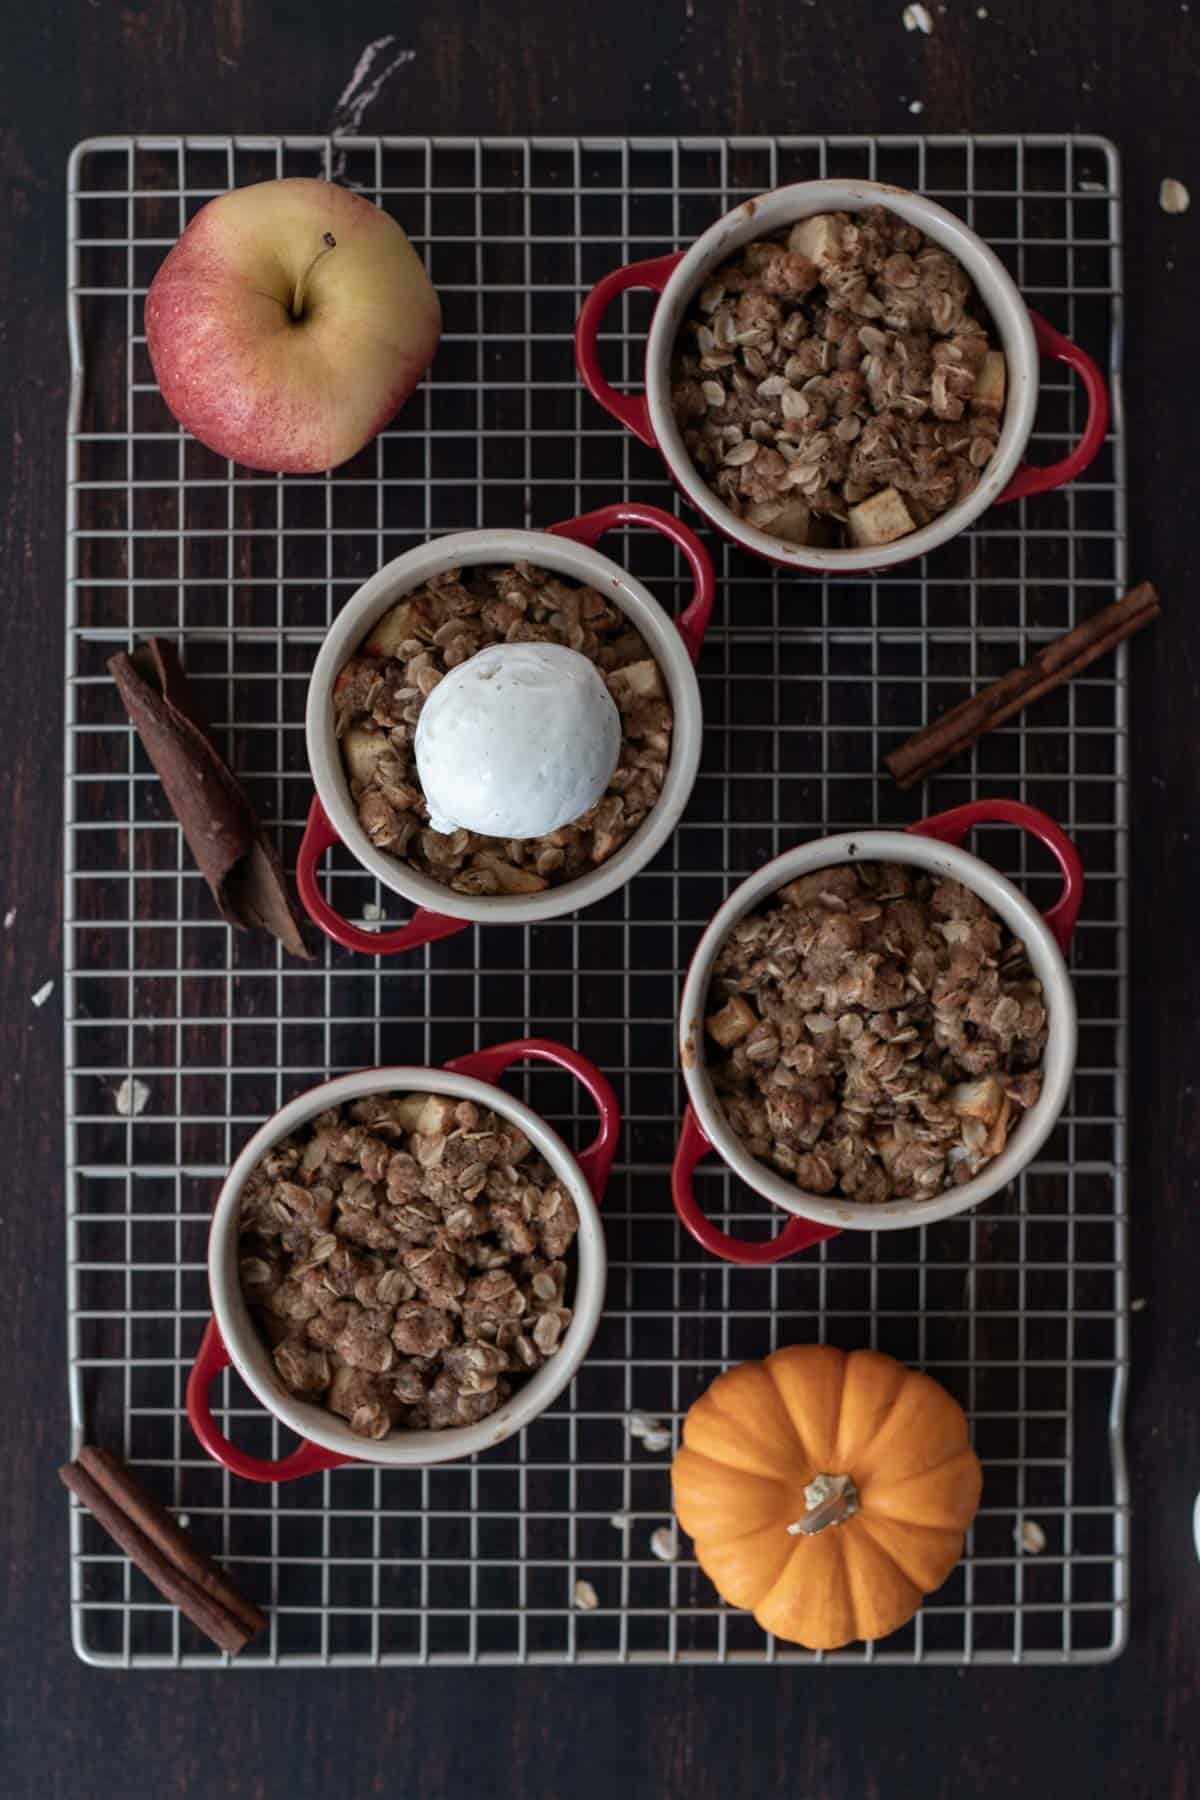 Four small apple crisp's on a wire baking rack with a scoop of vanilla ice cream on top.